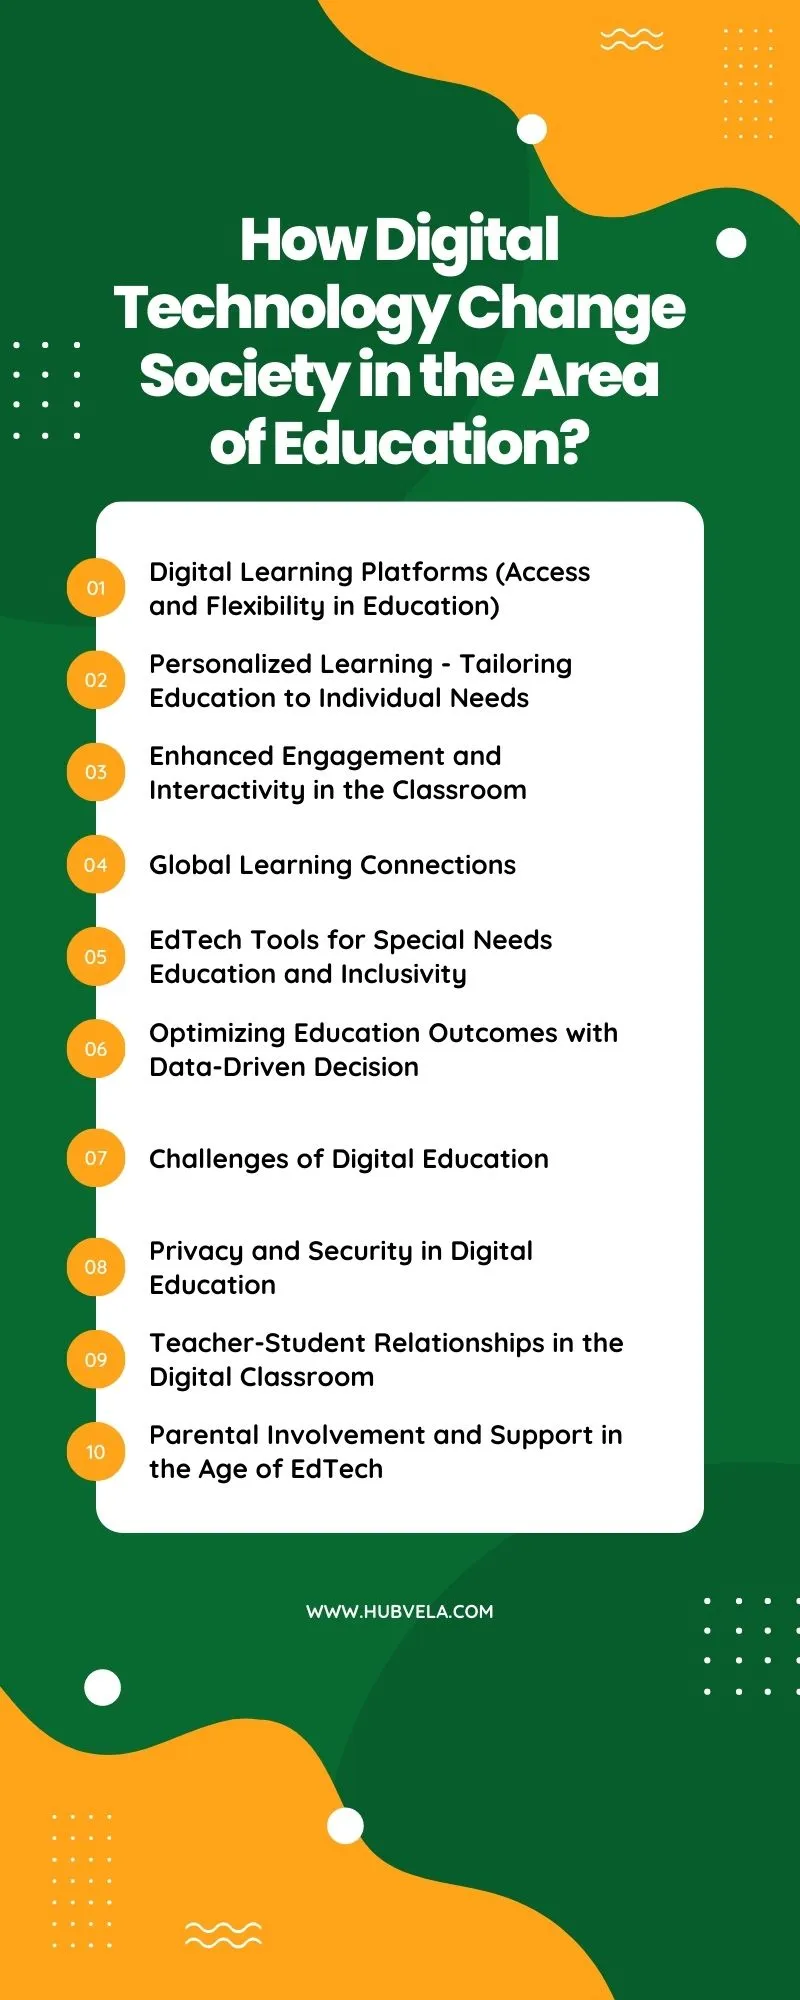 How Digital Technology Change Society in the Area of Education Infographic